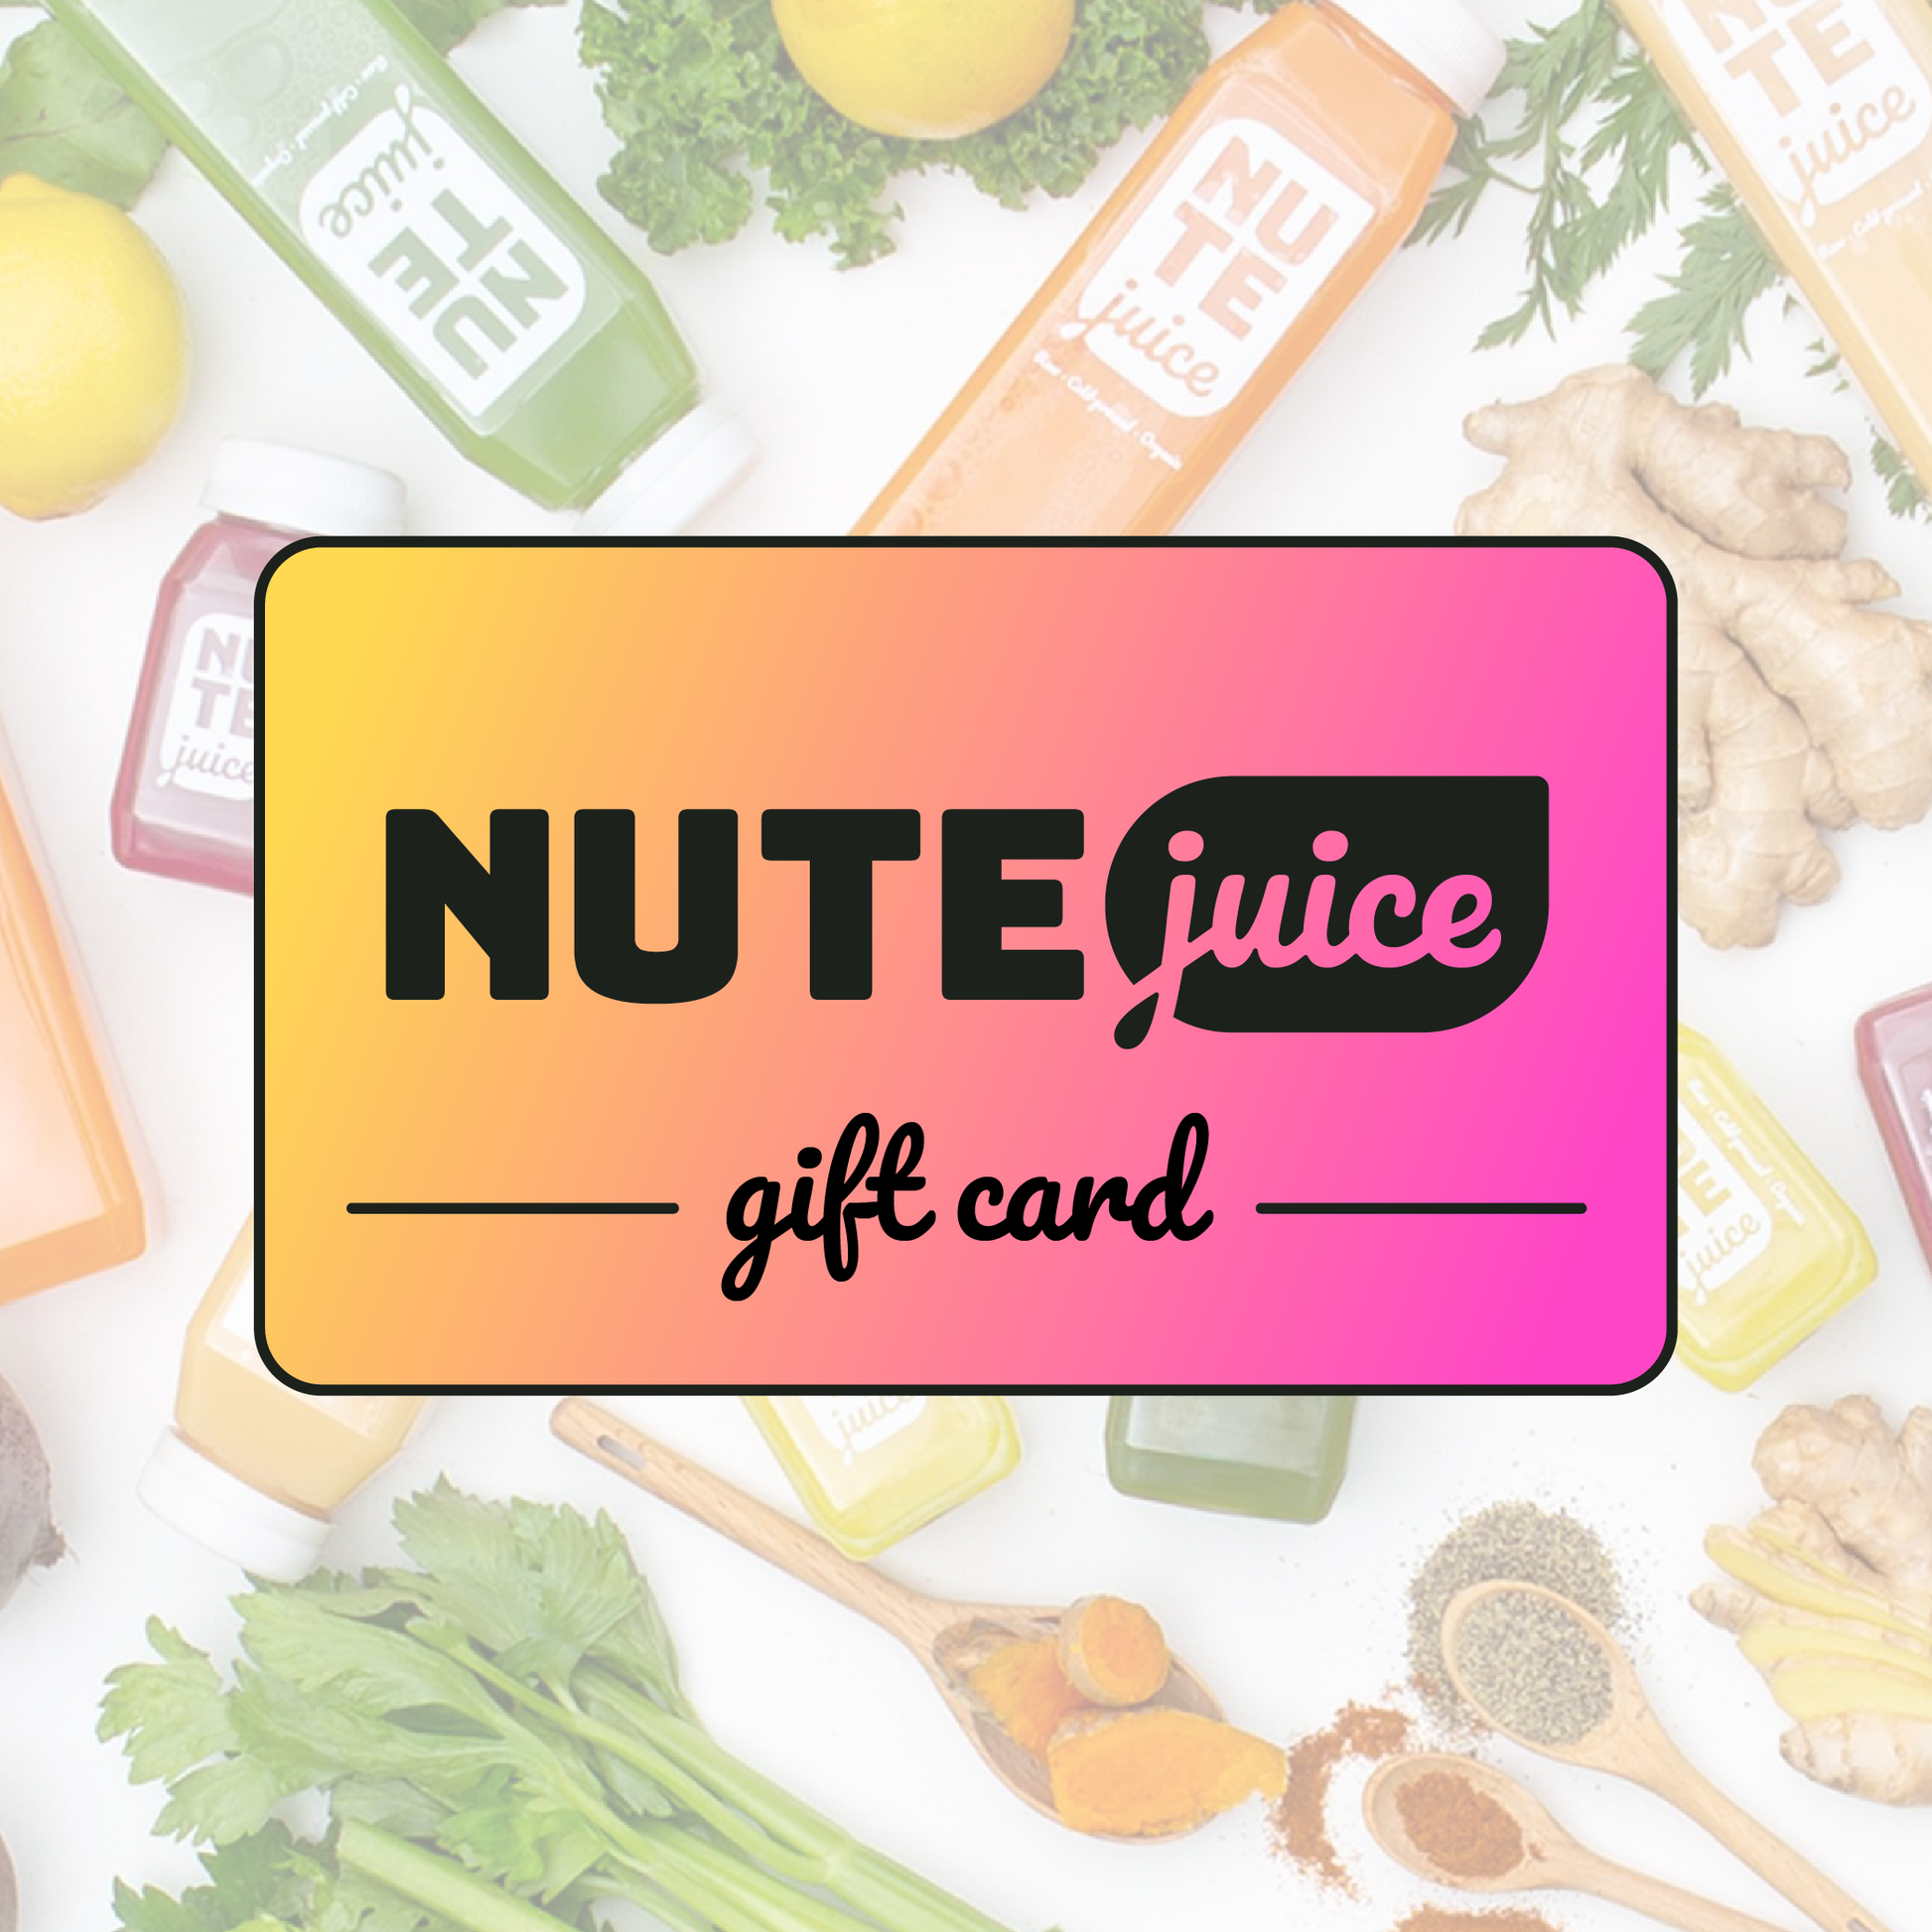 nute juice gift card